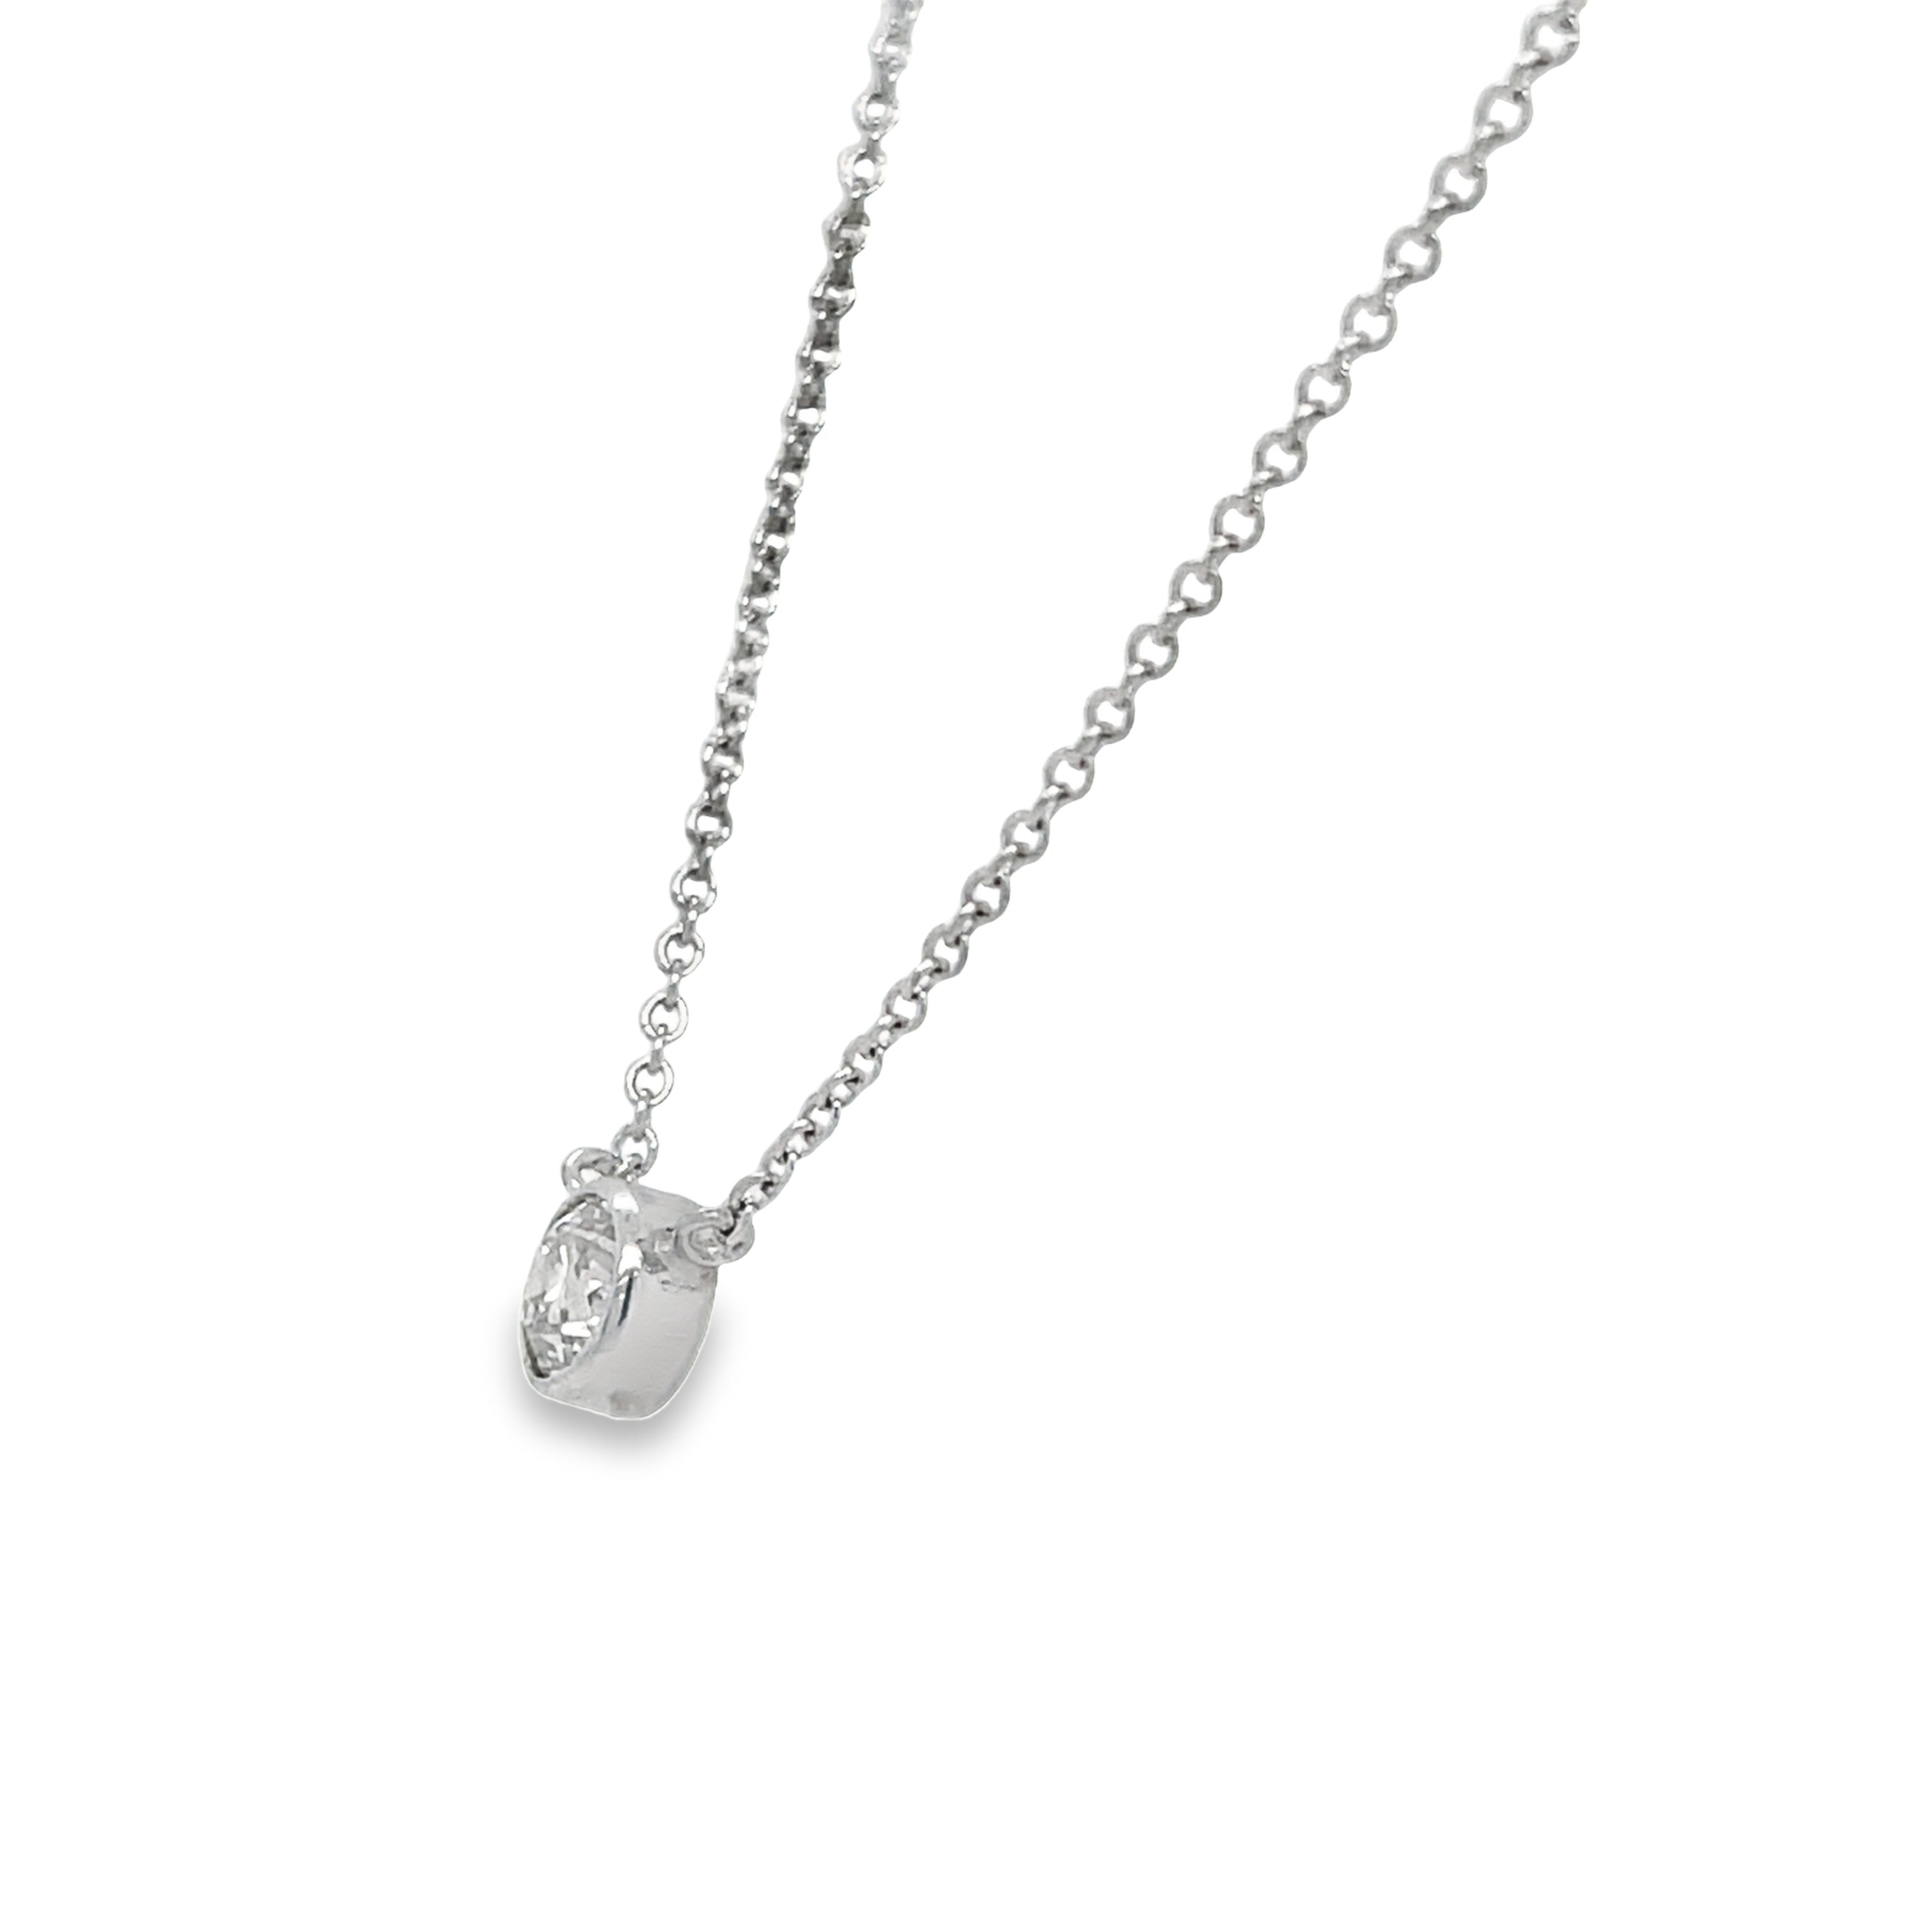 Expertly crafted with a 0.25 carat, round diamond, this 14k white gold pendant necklace is a stunning choice. The diamond is securely bezel-set, ensuring optimal shine and brilliance. In addition, its color grade of H and clarity grade of SI-1 promise a high-quality, sparkling accessory.